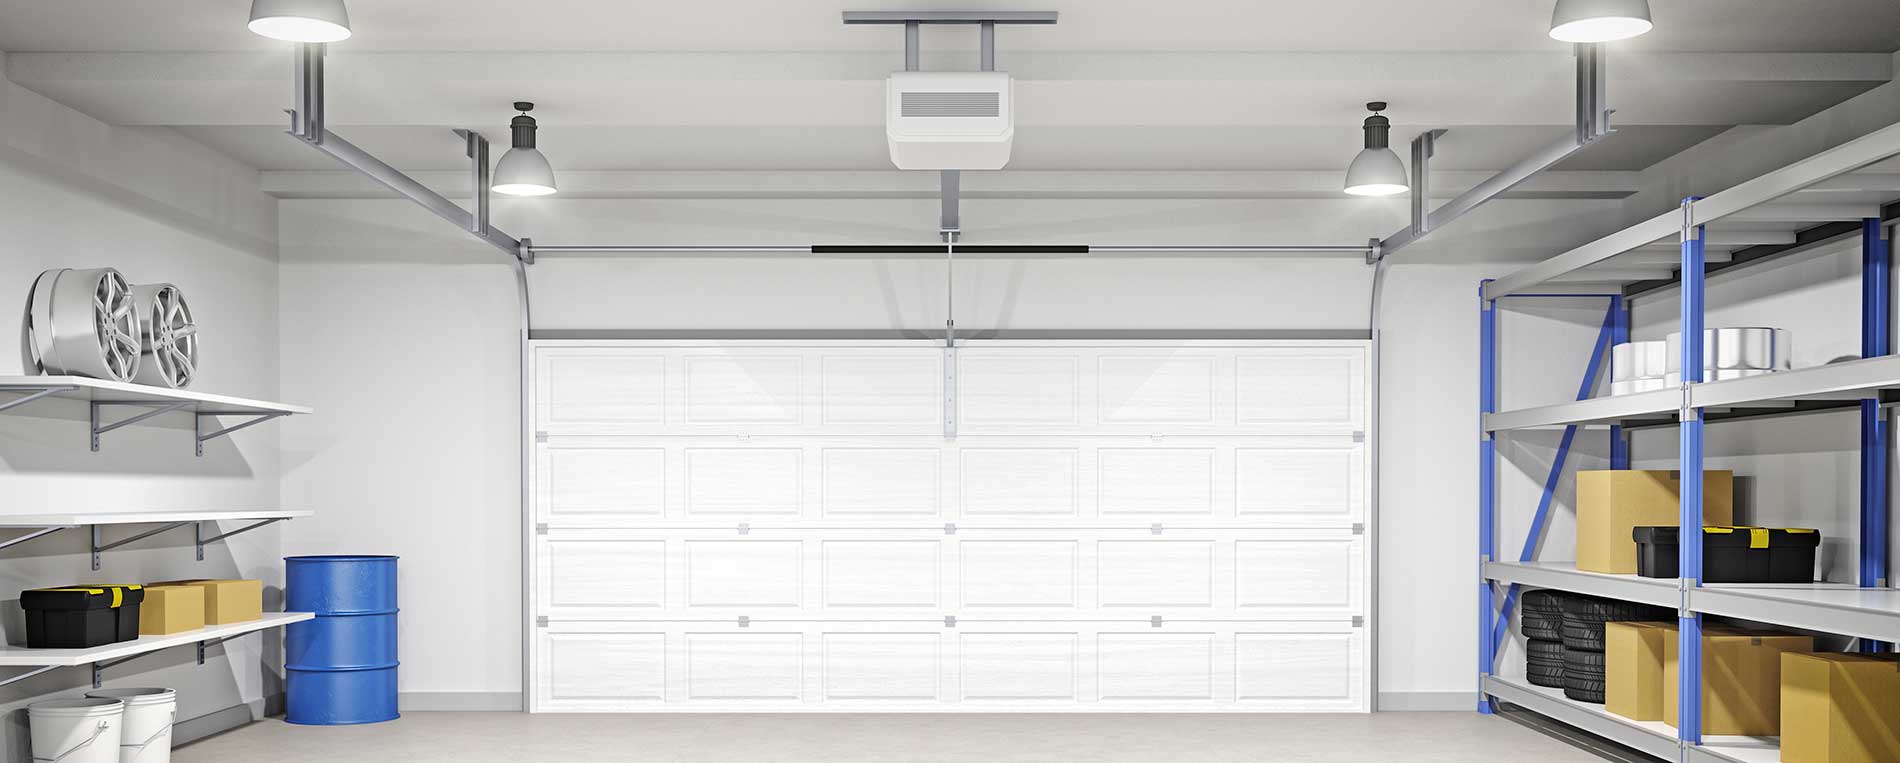 What You Should Know Before Buying a New Garage Door Opener